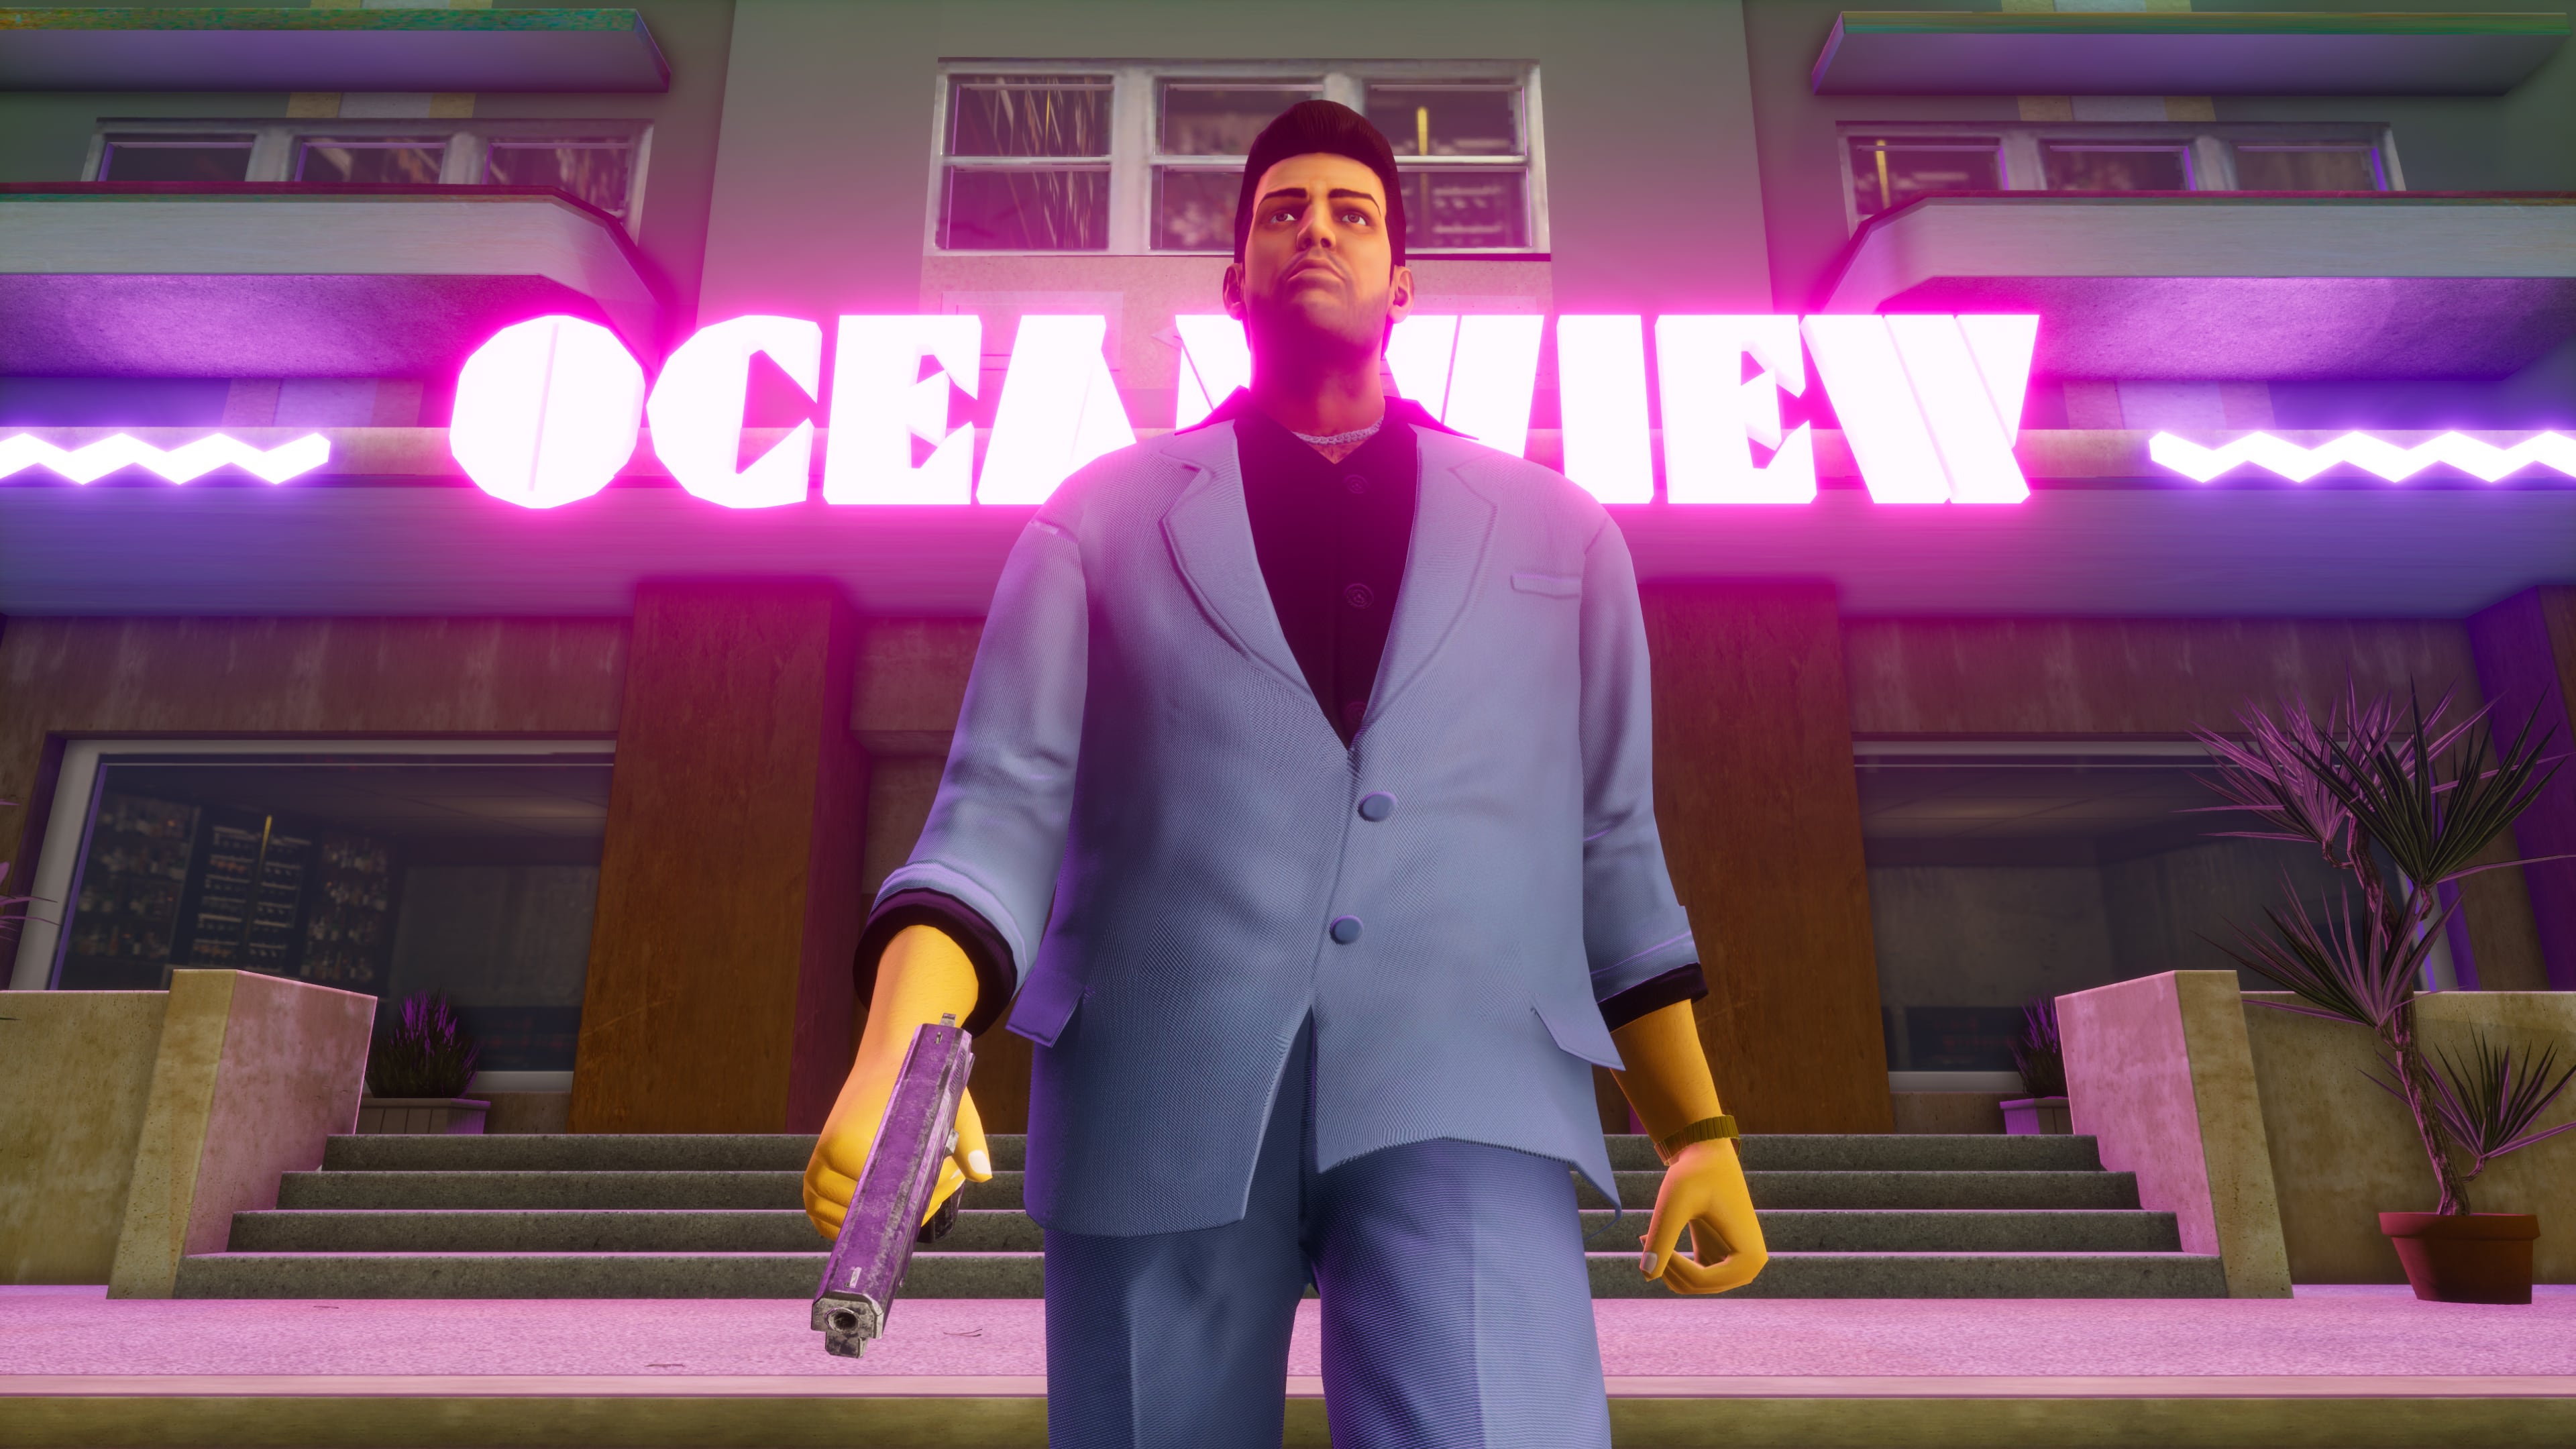 Screenshot of the remastered Vice City from Grand Theft Auto: The Trilogy - The Definitive Edition.